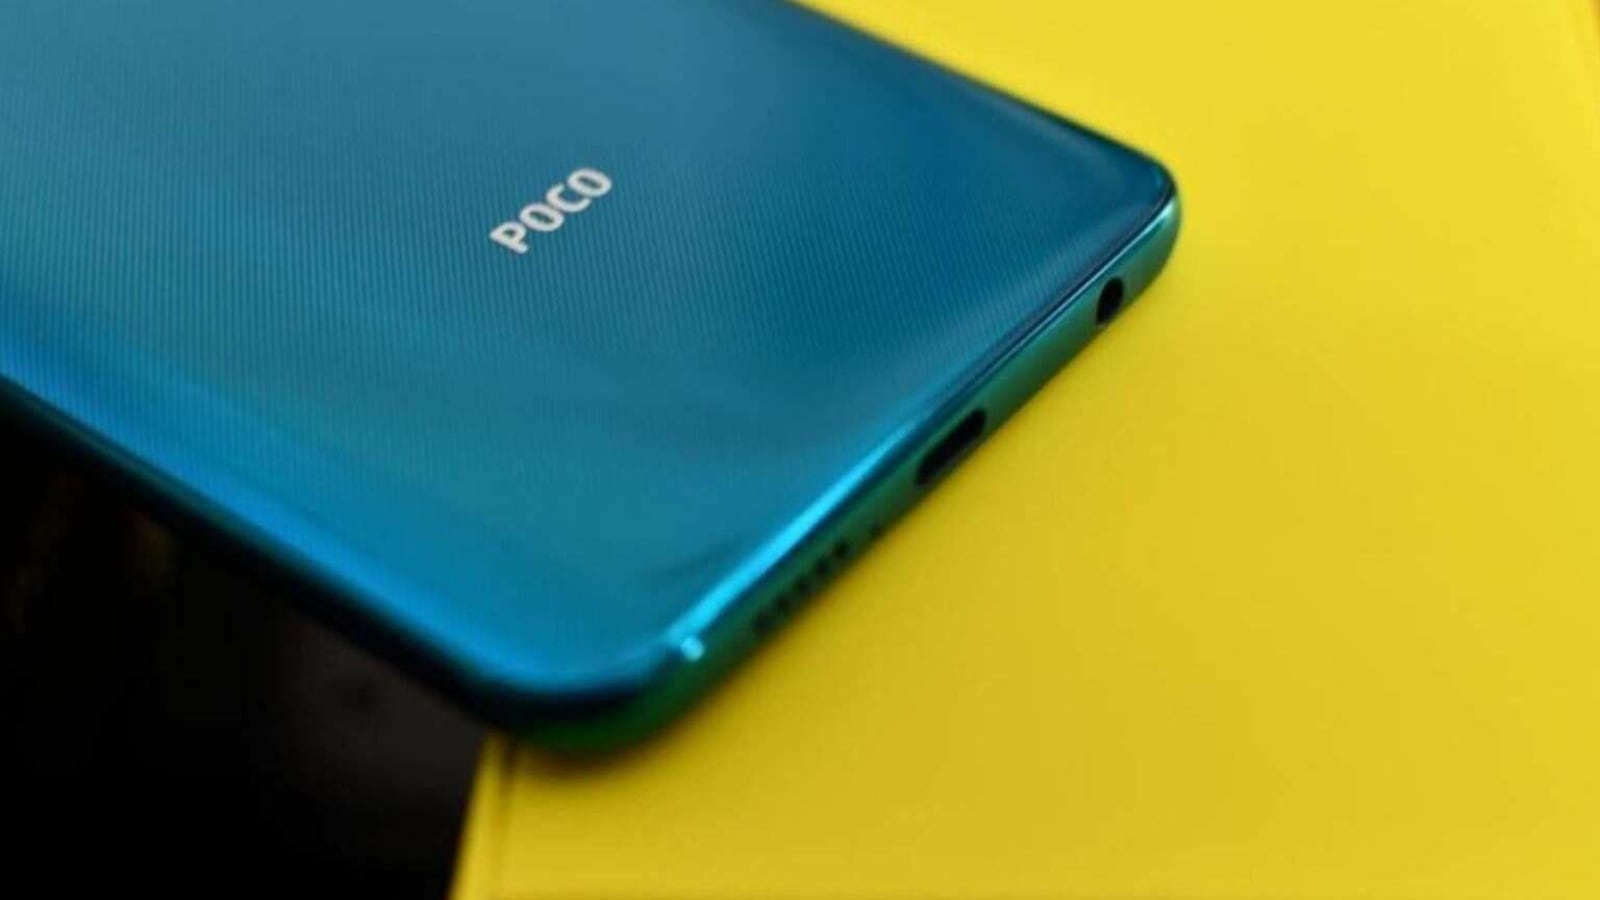 Poco M2 is coming soon to India with these features